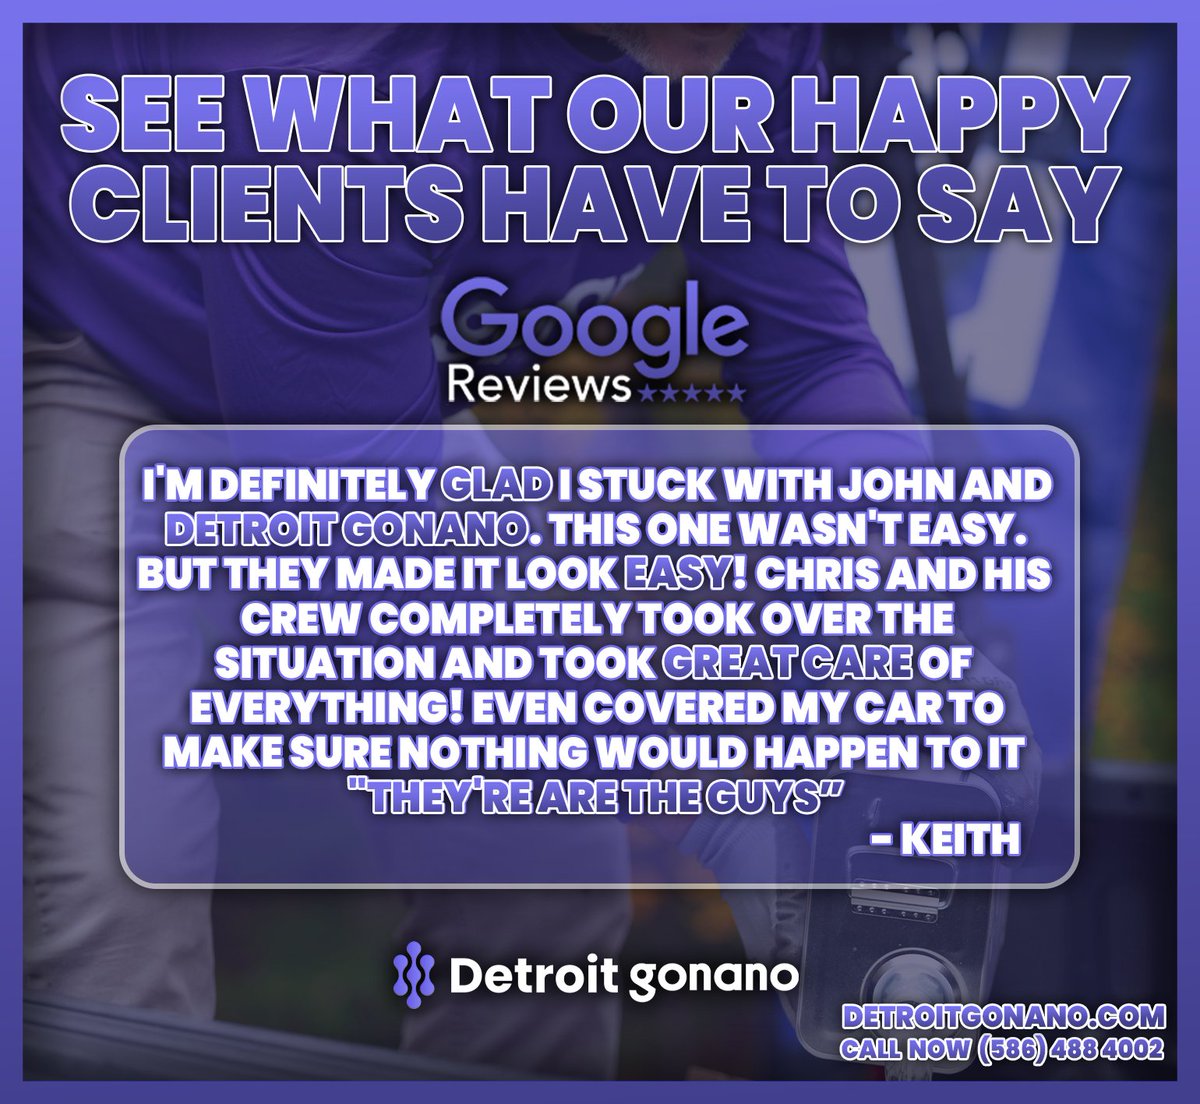 Let the reviews speak for themselves!
Discover what people are saying about our services and the difference we've made in their homes.
Your satisfaction is our priority.
#HappyCustomers #Testimonials #SatisfiedClients